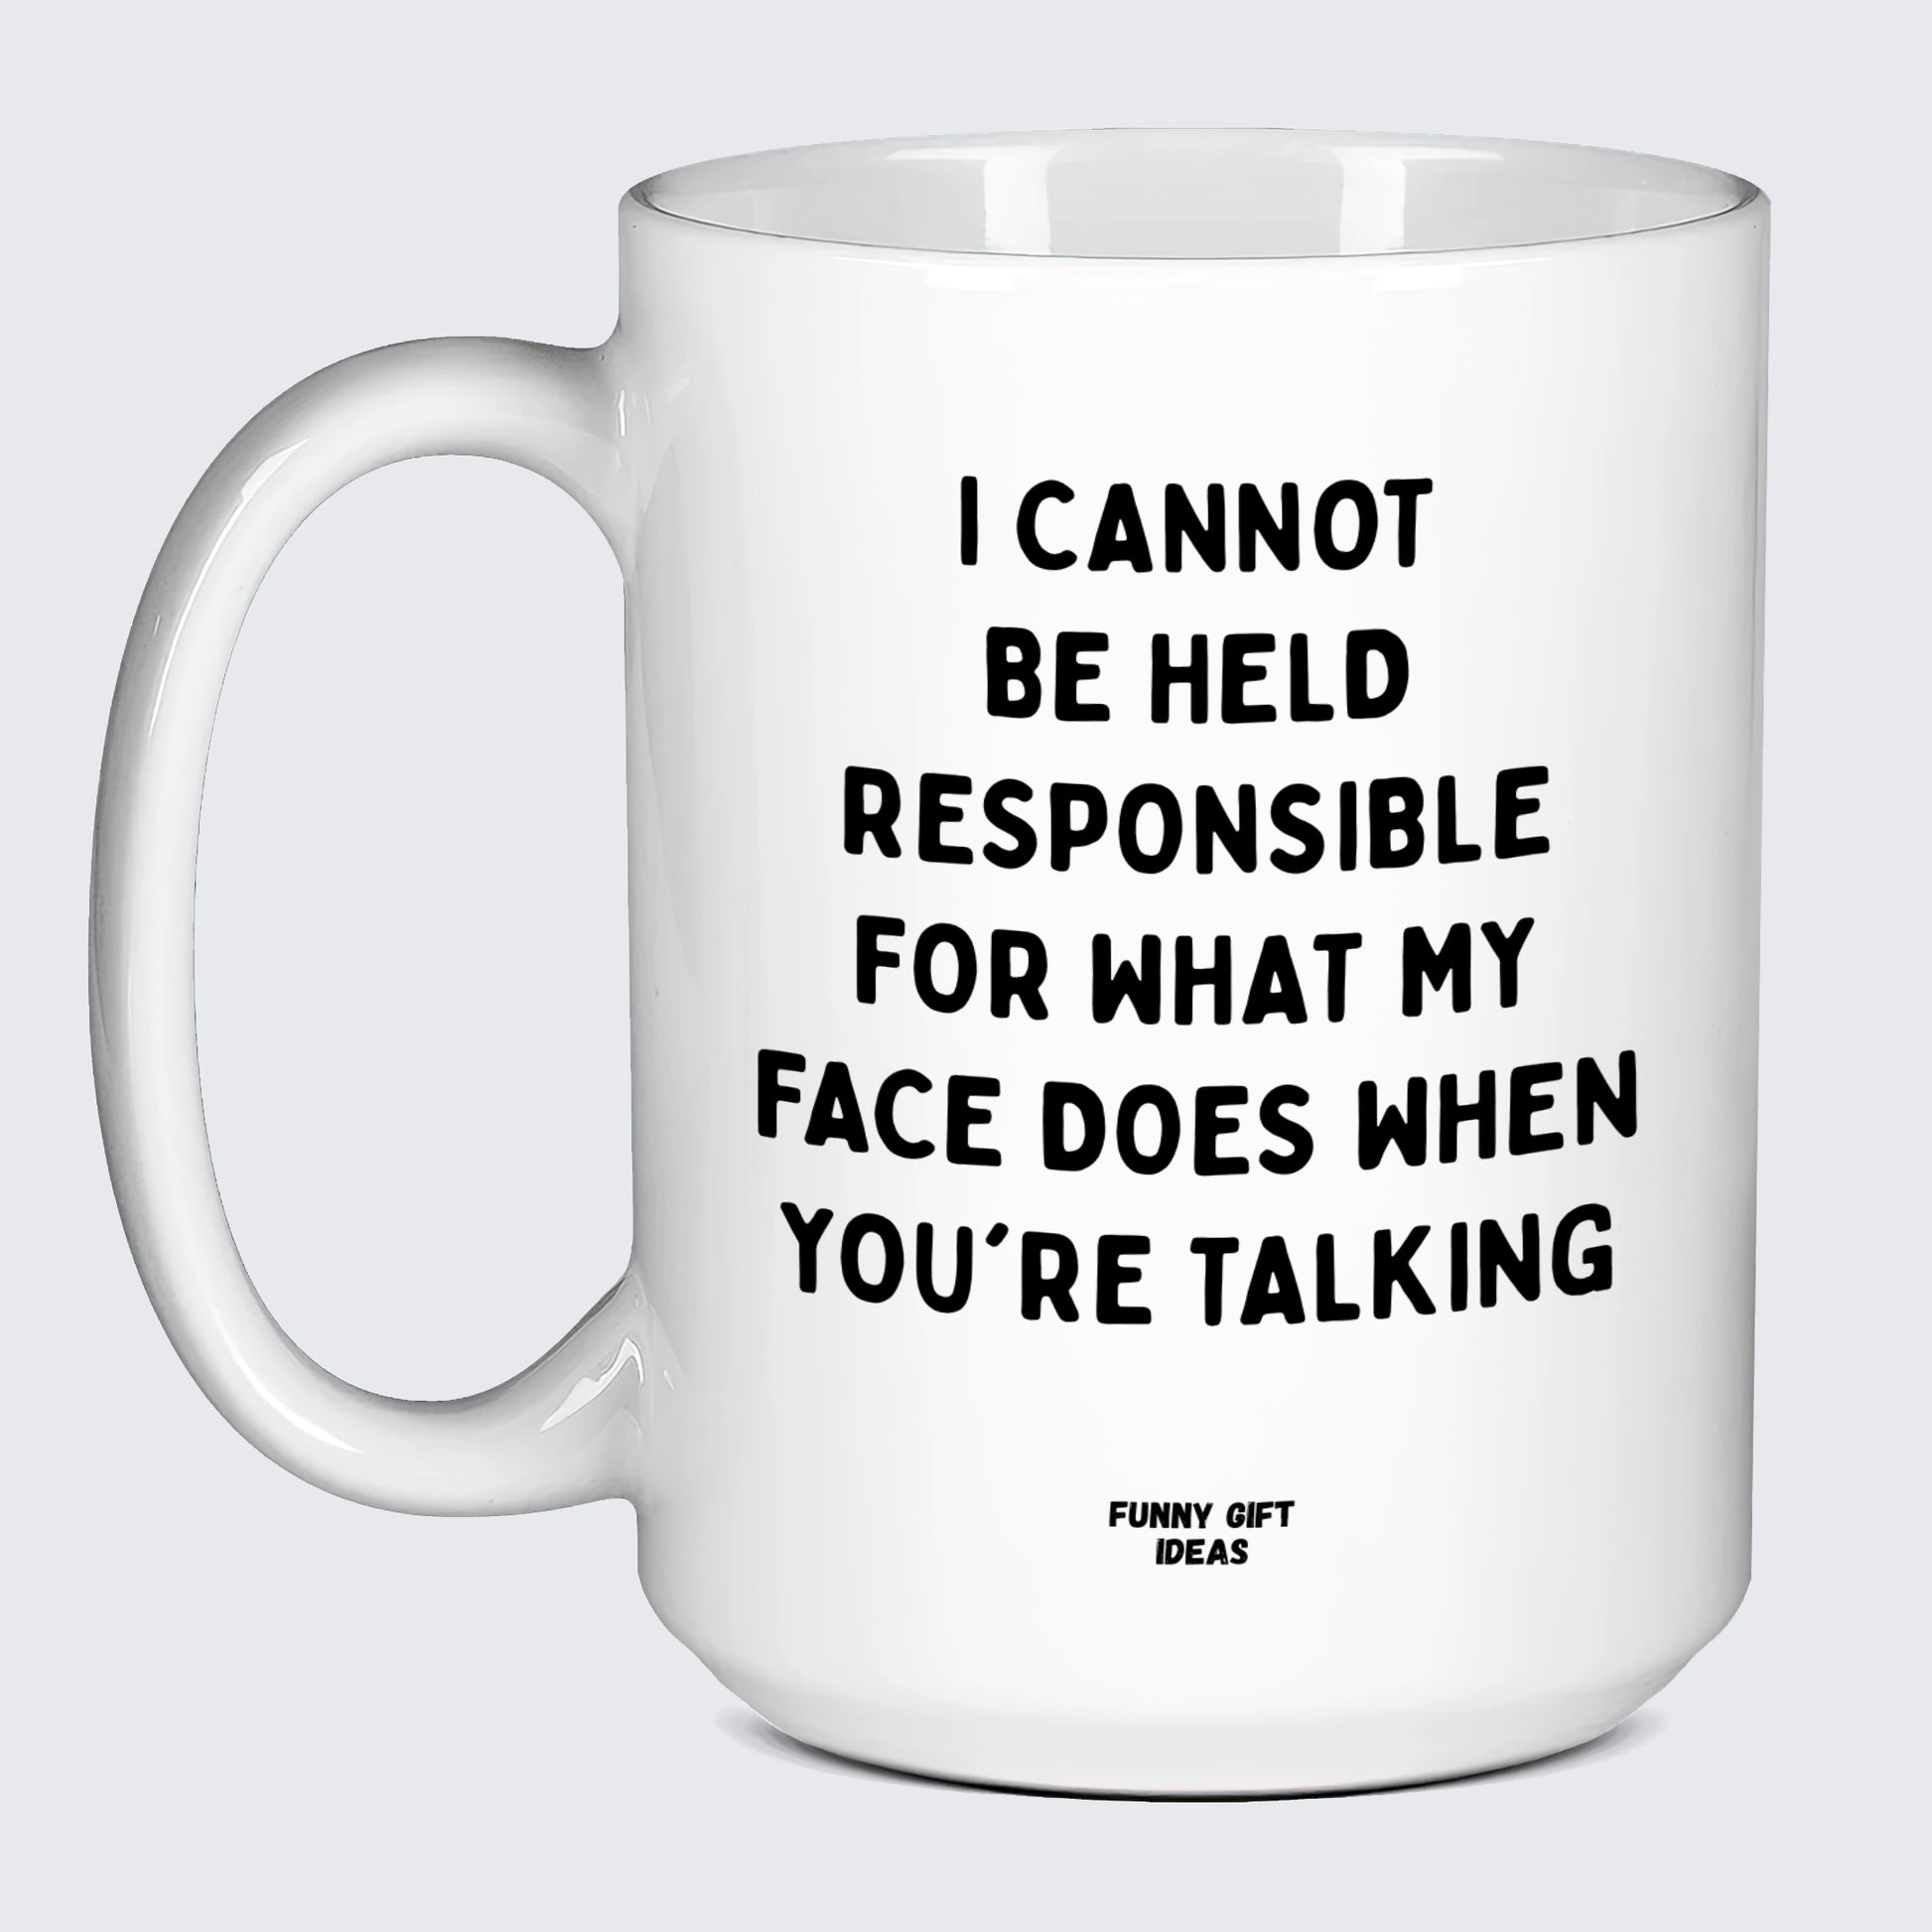 Funny Coffee Mugs I Cannot Be Held Responsible for What My Face Does When You're Talking - Funny Gift Ideas